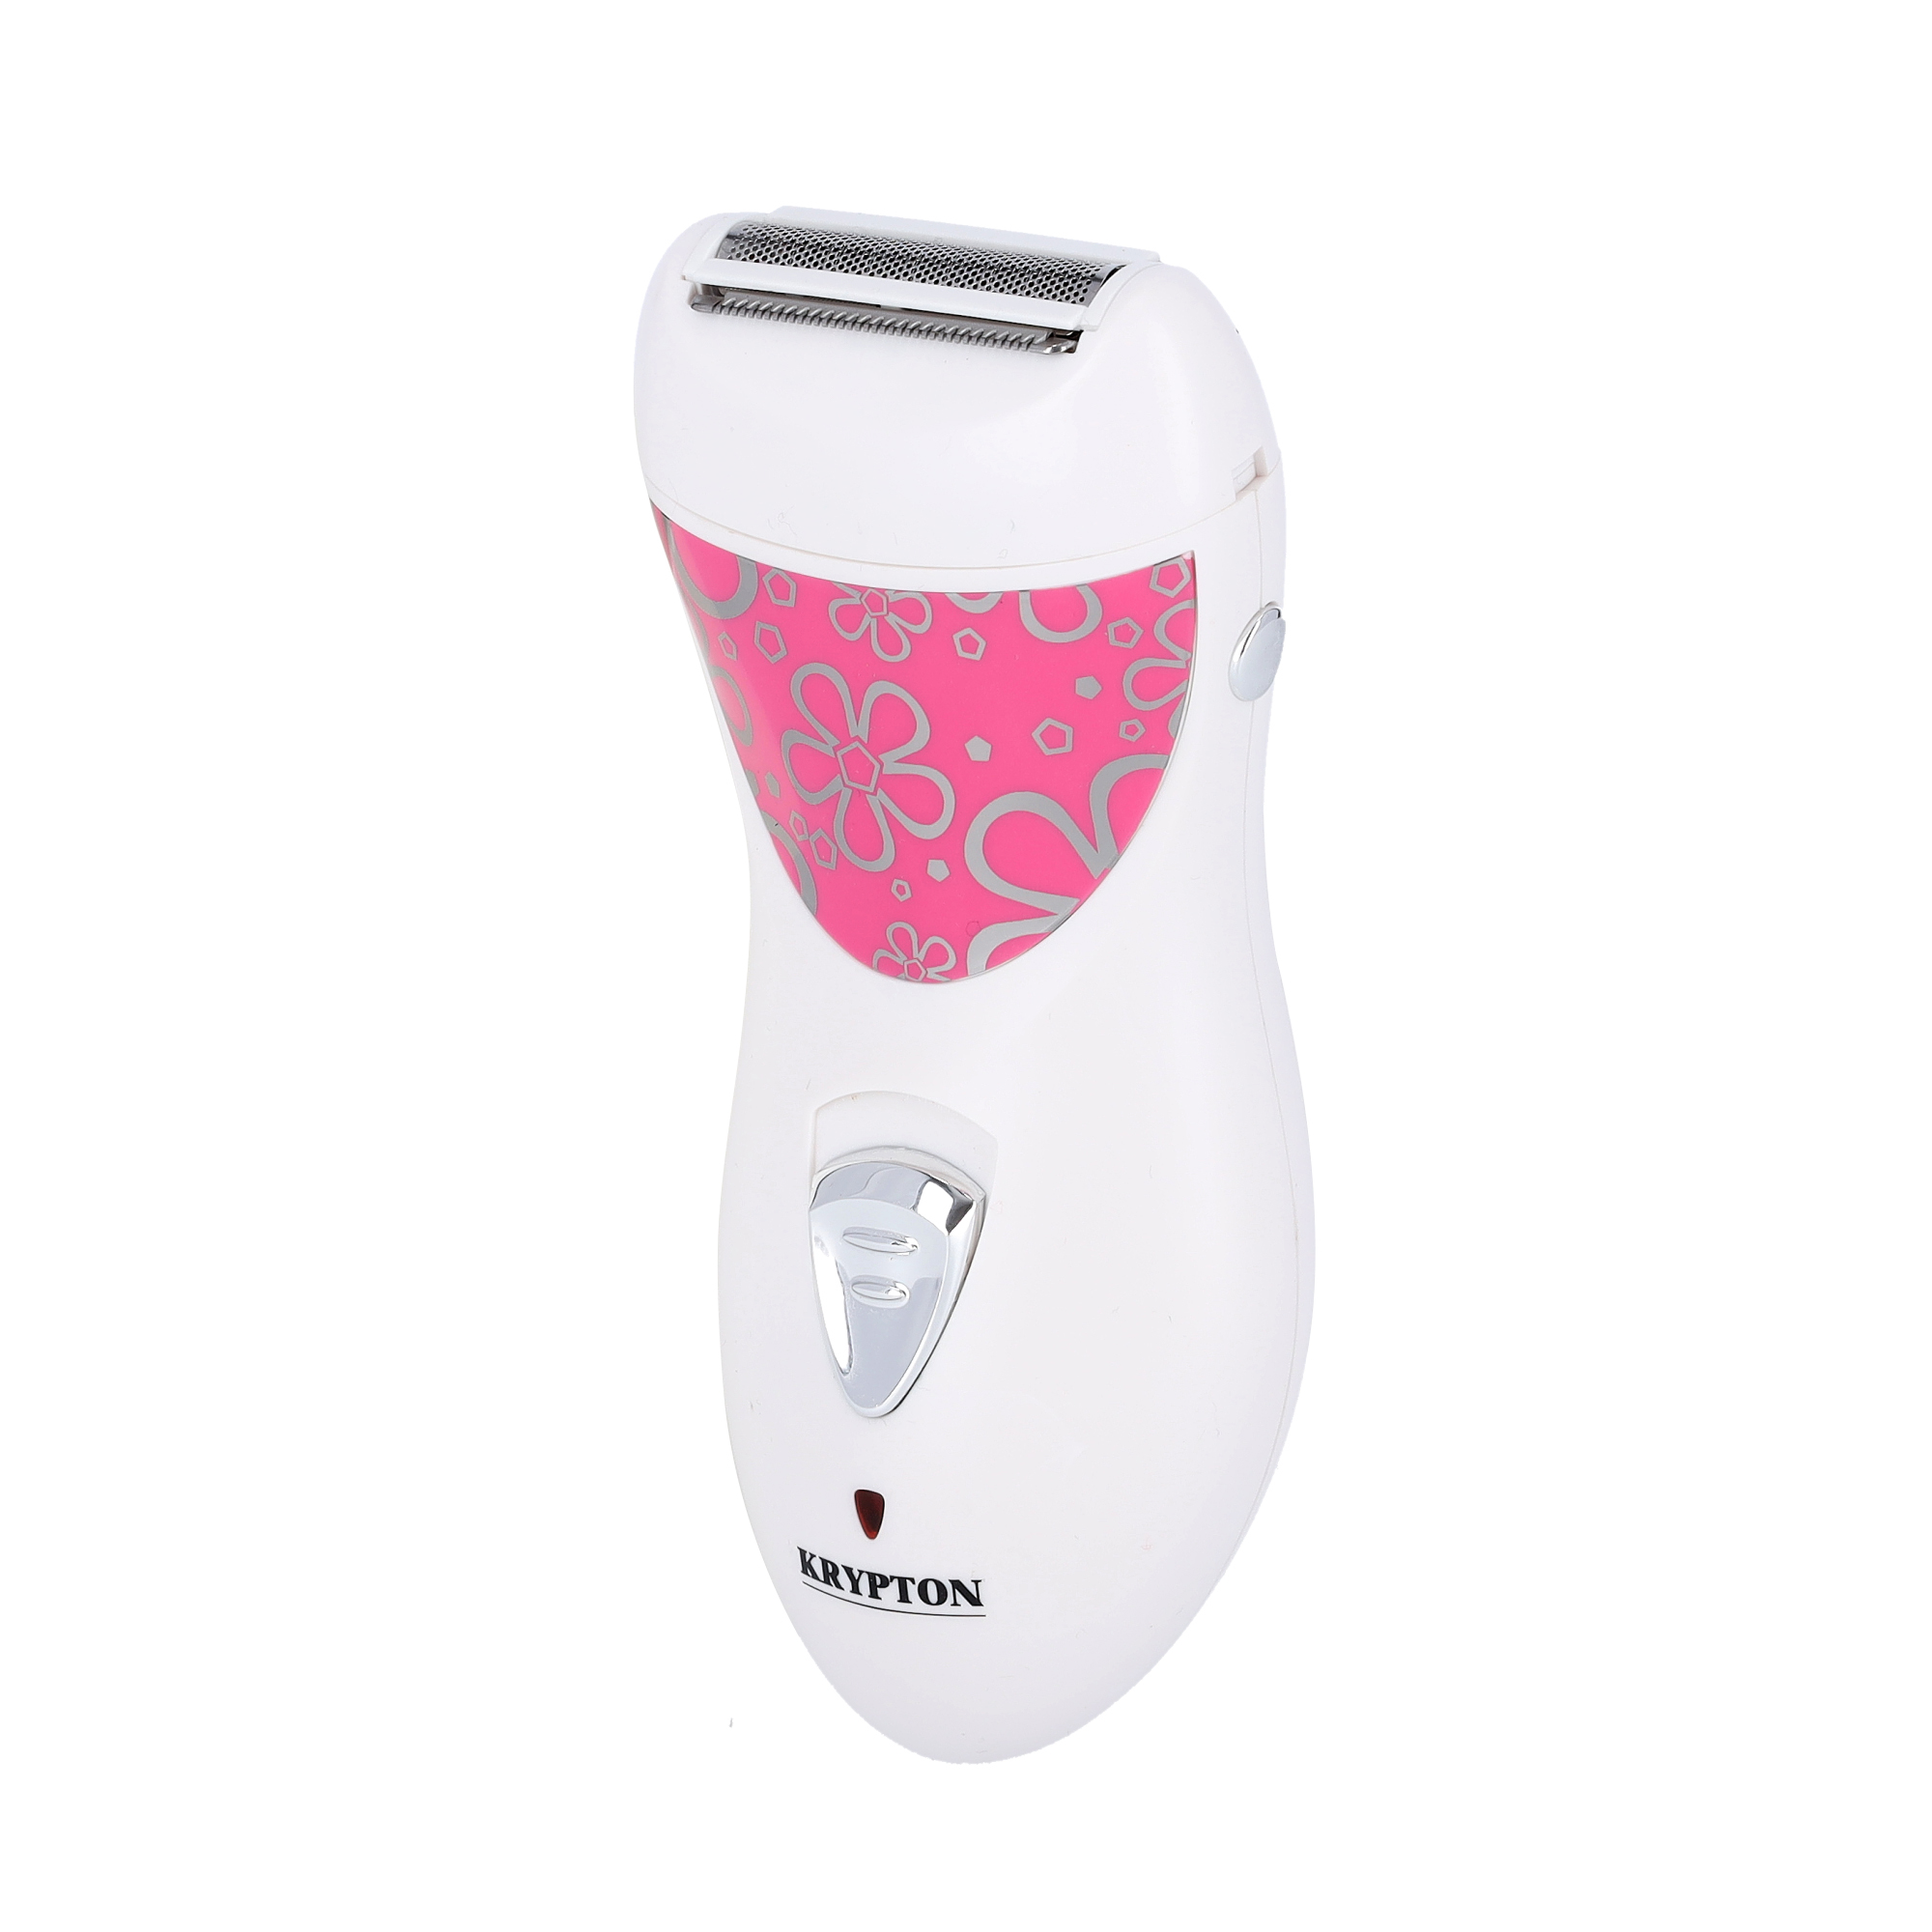 Buy 600Mah Hair Removal Ladies Epilator 2 in 1 Cordless Rechargeable Shaver  with Shaving Head for Women Skin Care Online - Krypton